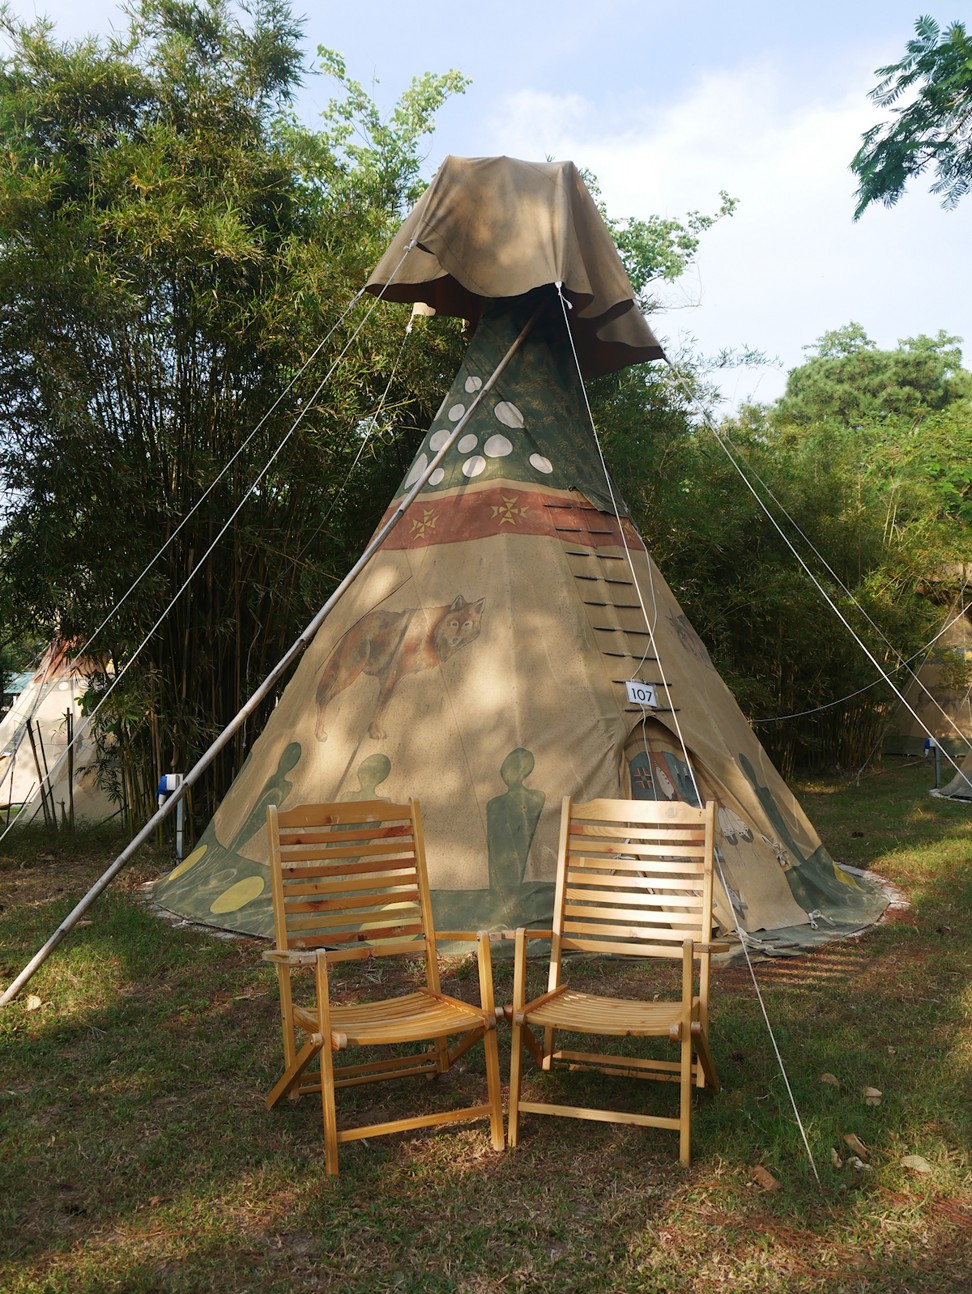 A Native-American-style tepee at the Sai Yuen glamping site in Cheung Chau. Photo: Stuart Heaver